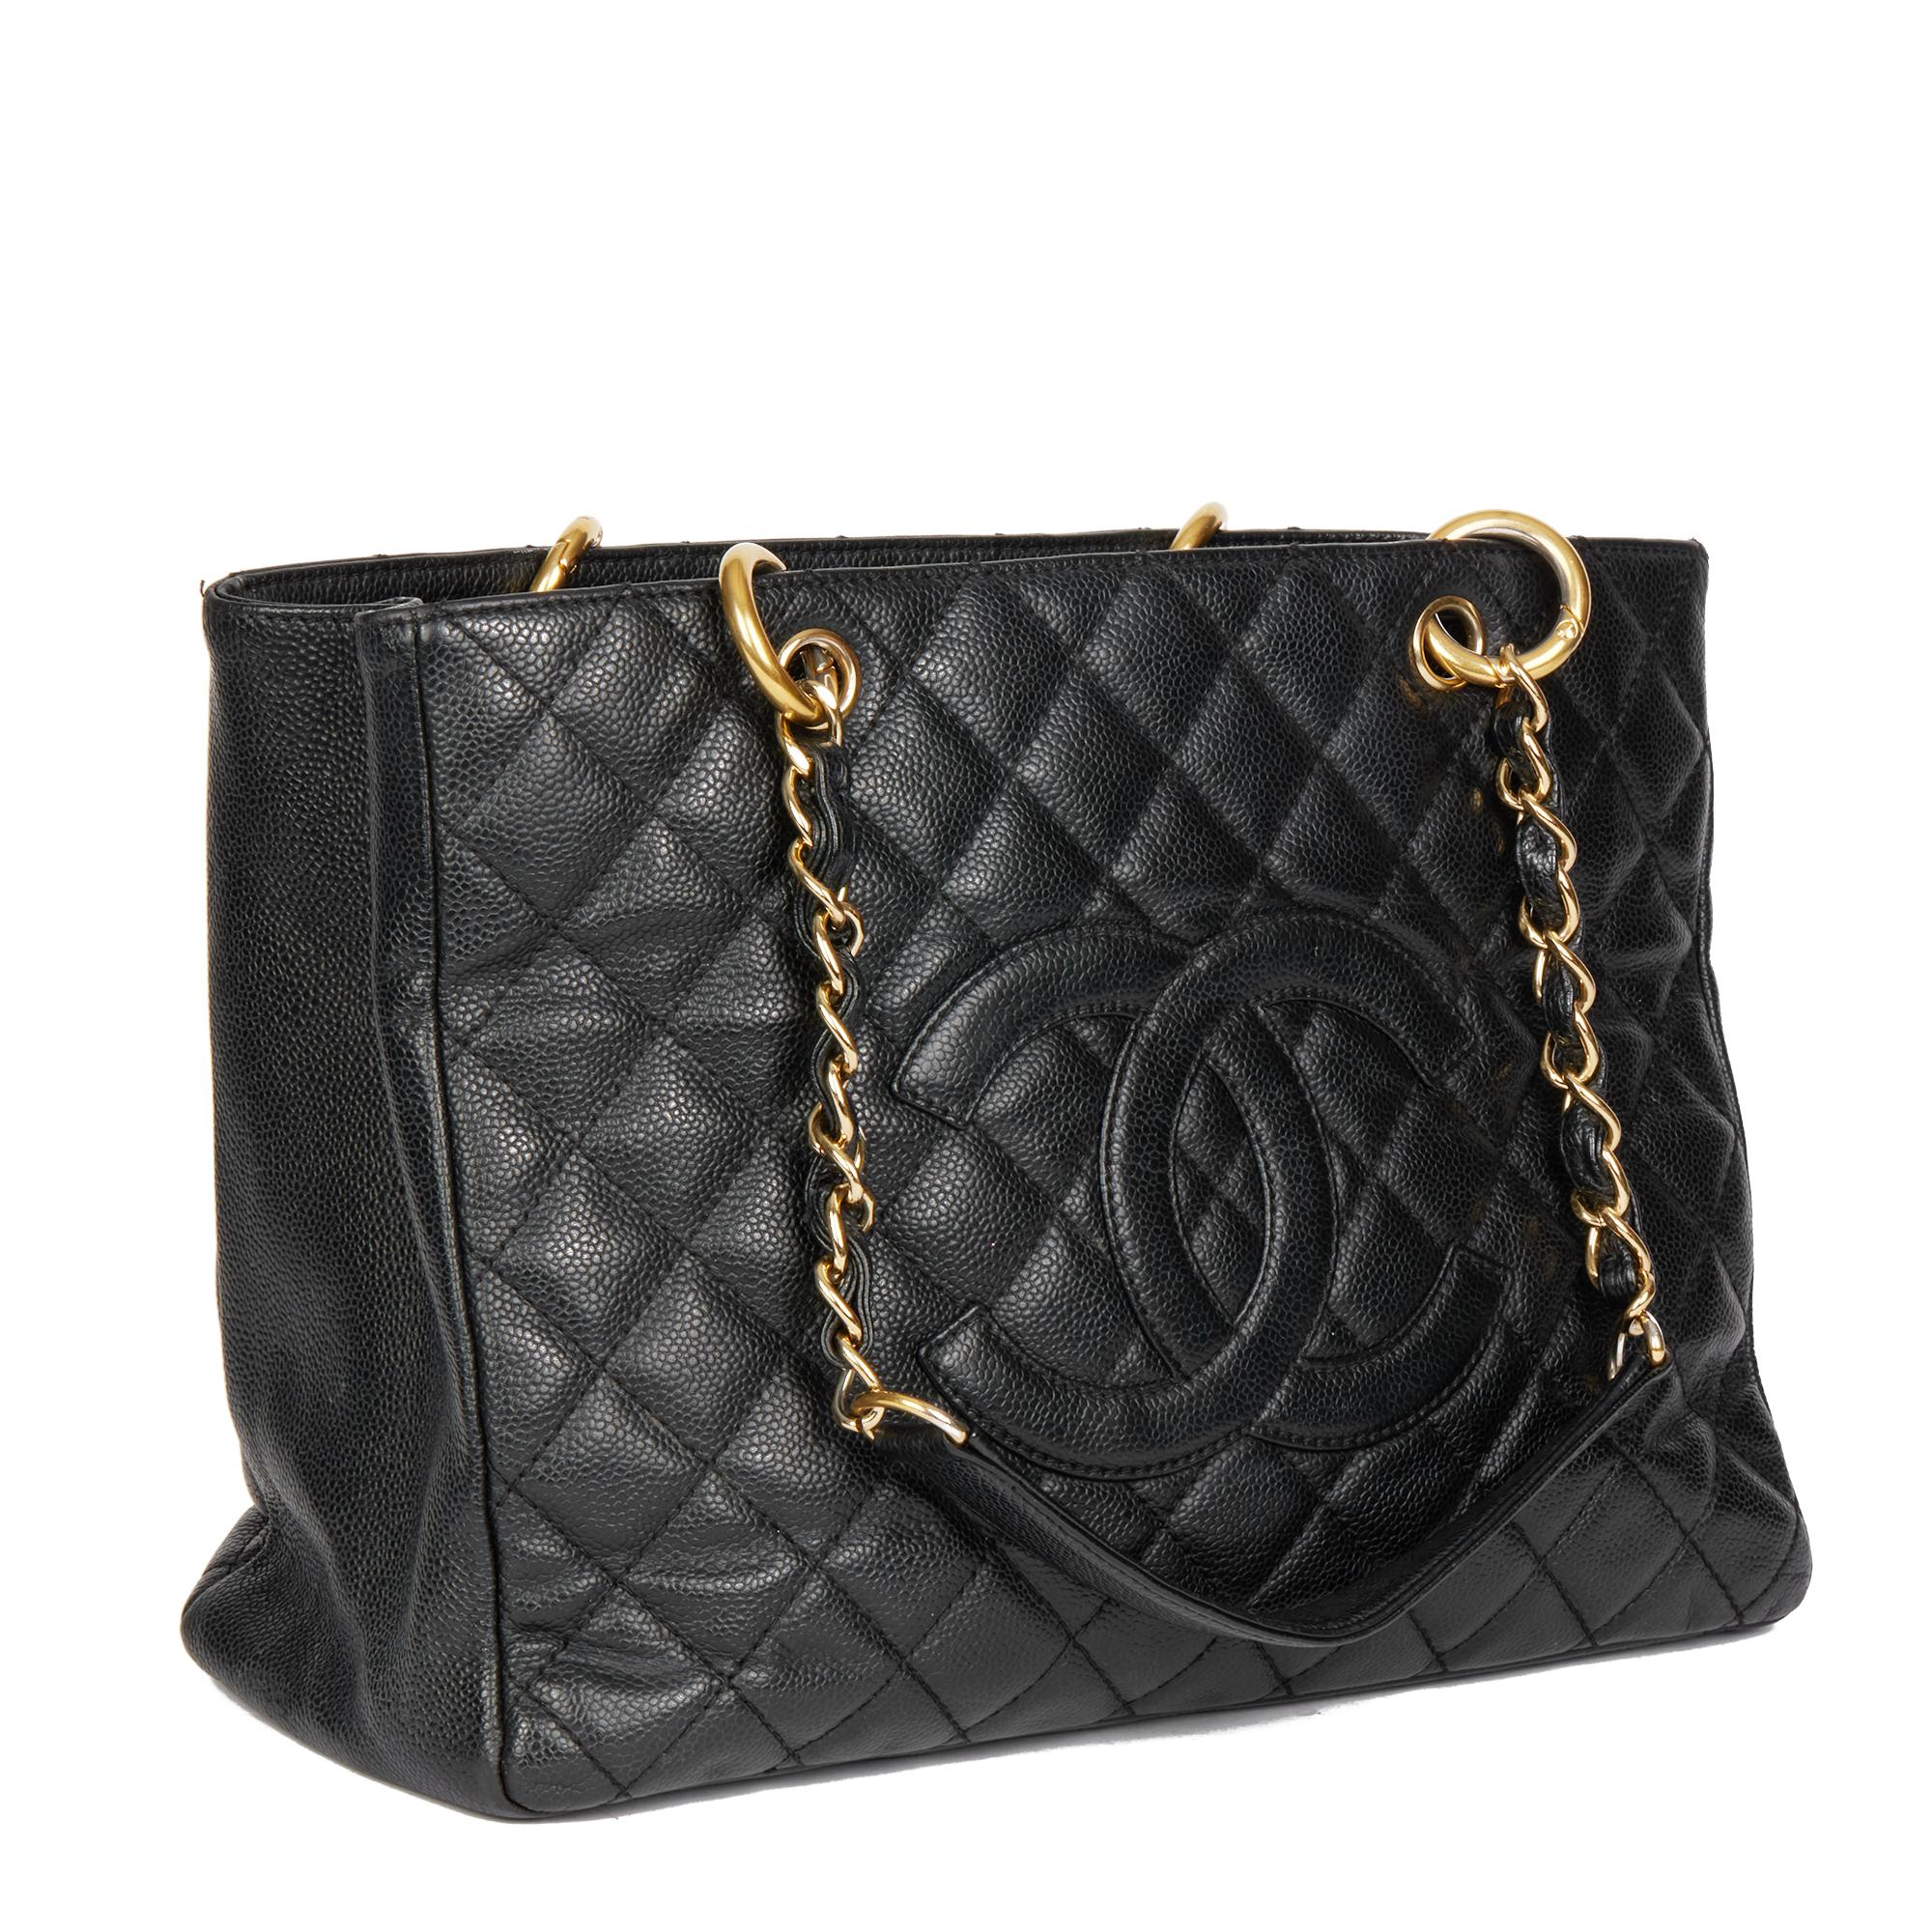 CHANEL
Black Quilted Caviar Leather Grand Shopping Tote

Xupes Reference: HB4499
Serial Number: 12732747
Age (Circa): 2008
Accompanied By: Chanel Dust Bag
Authenticity Details: Serial Sticker (Made in Italy)
Gender: Ladies
Type: Tote

Colour: